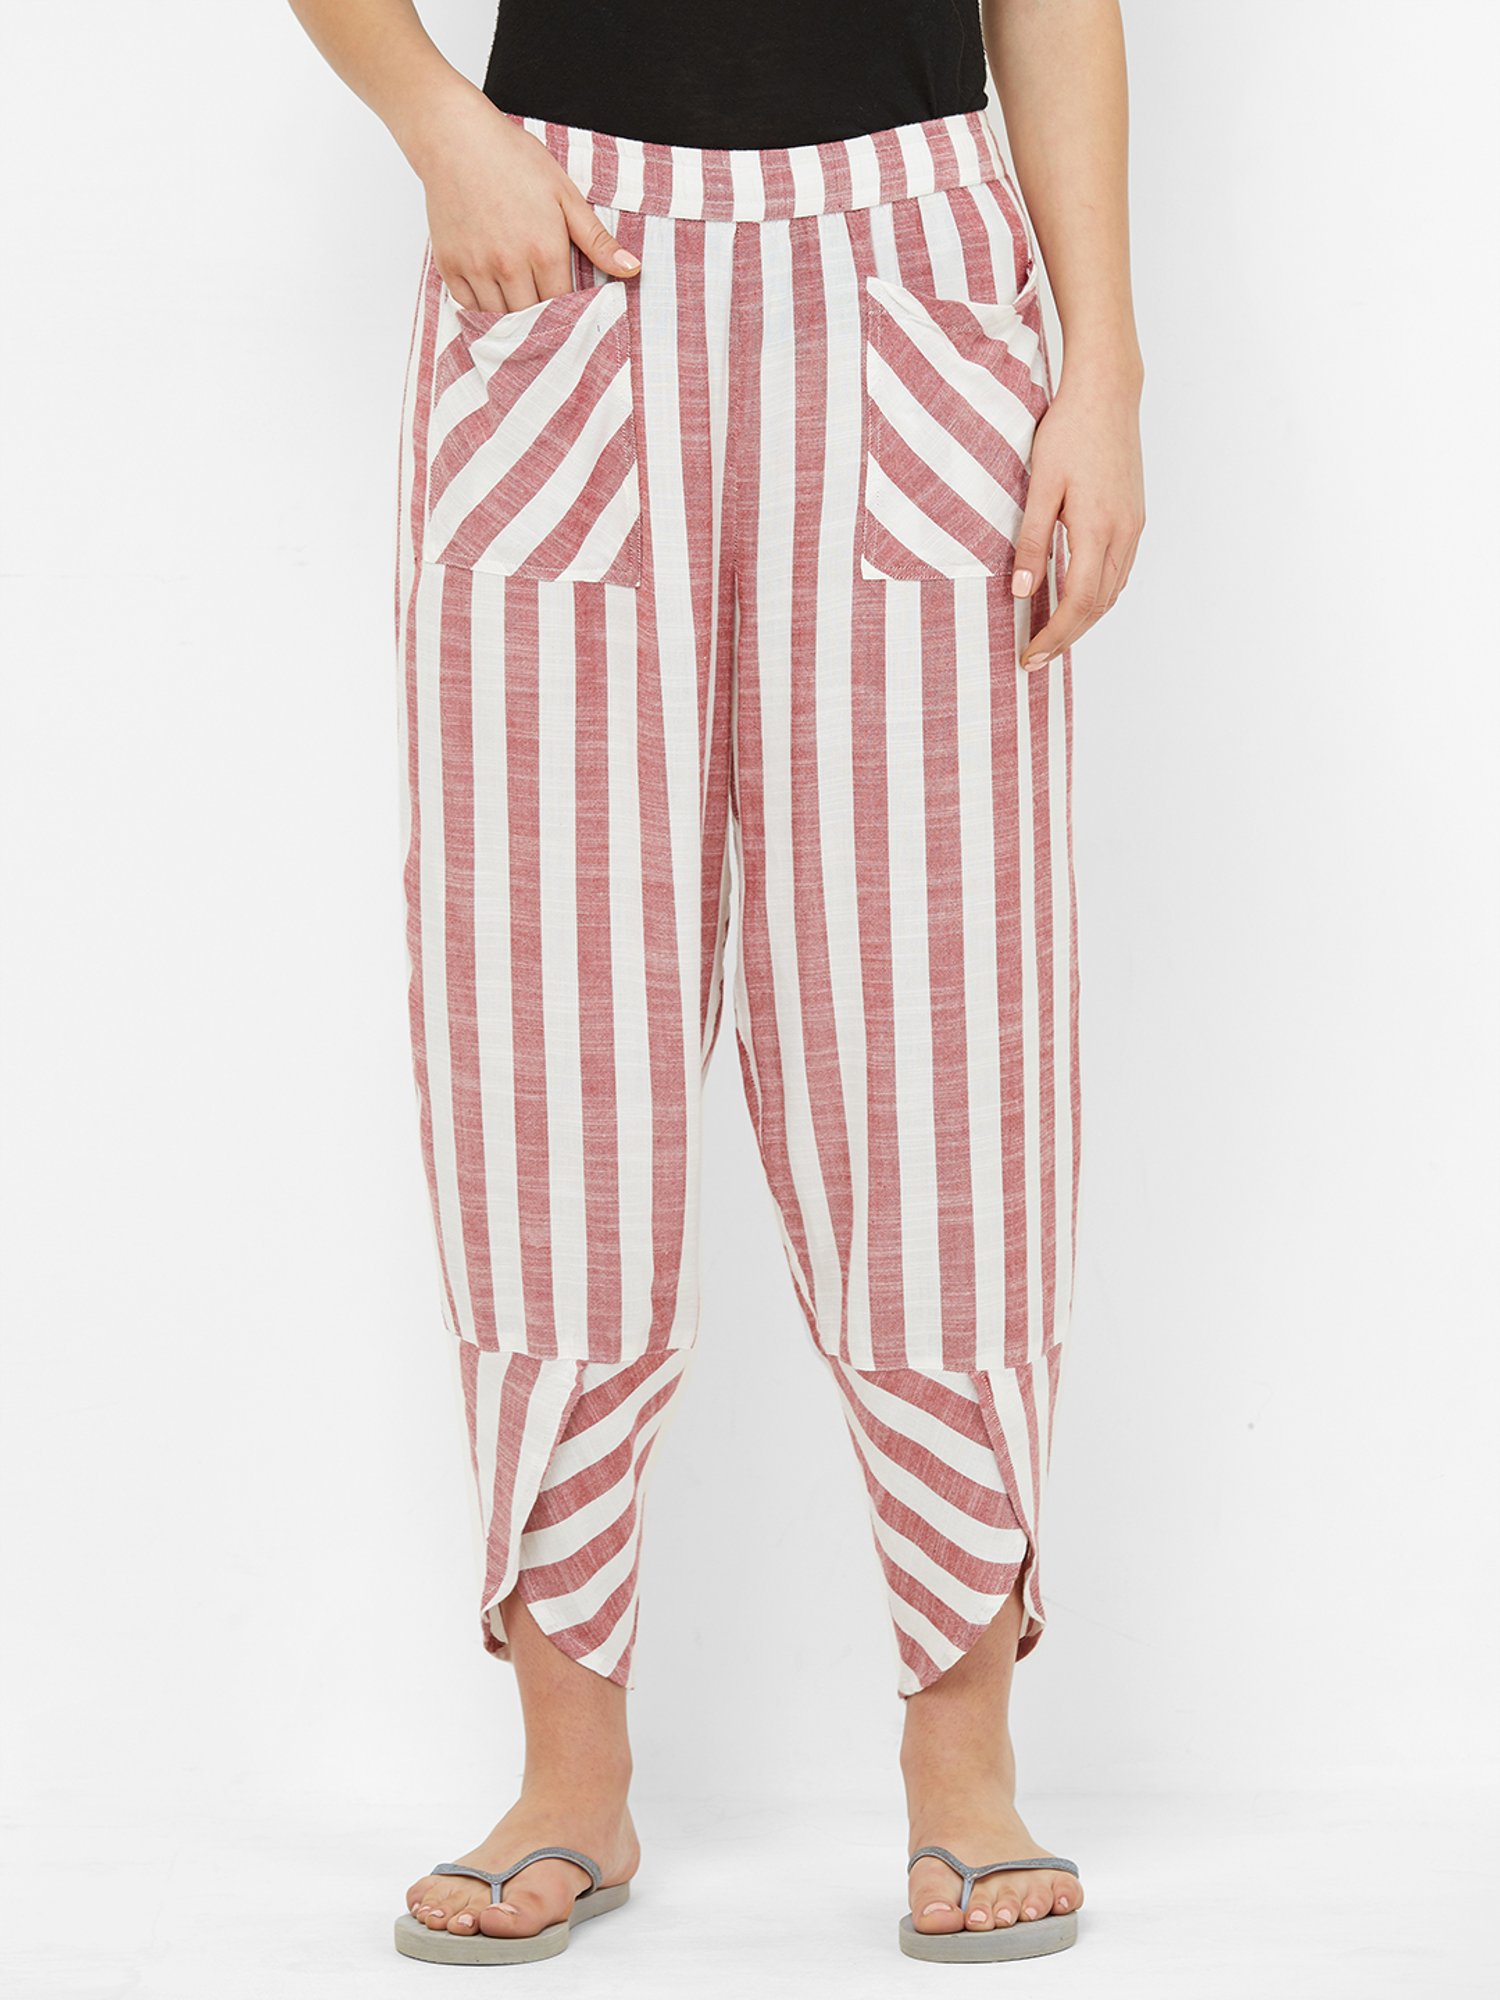 Red fish printed top with striped pants  set of two by The Cotton Staple   The Secret Label